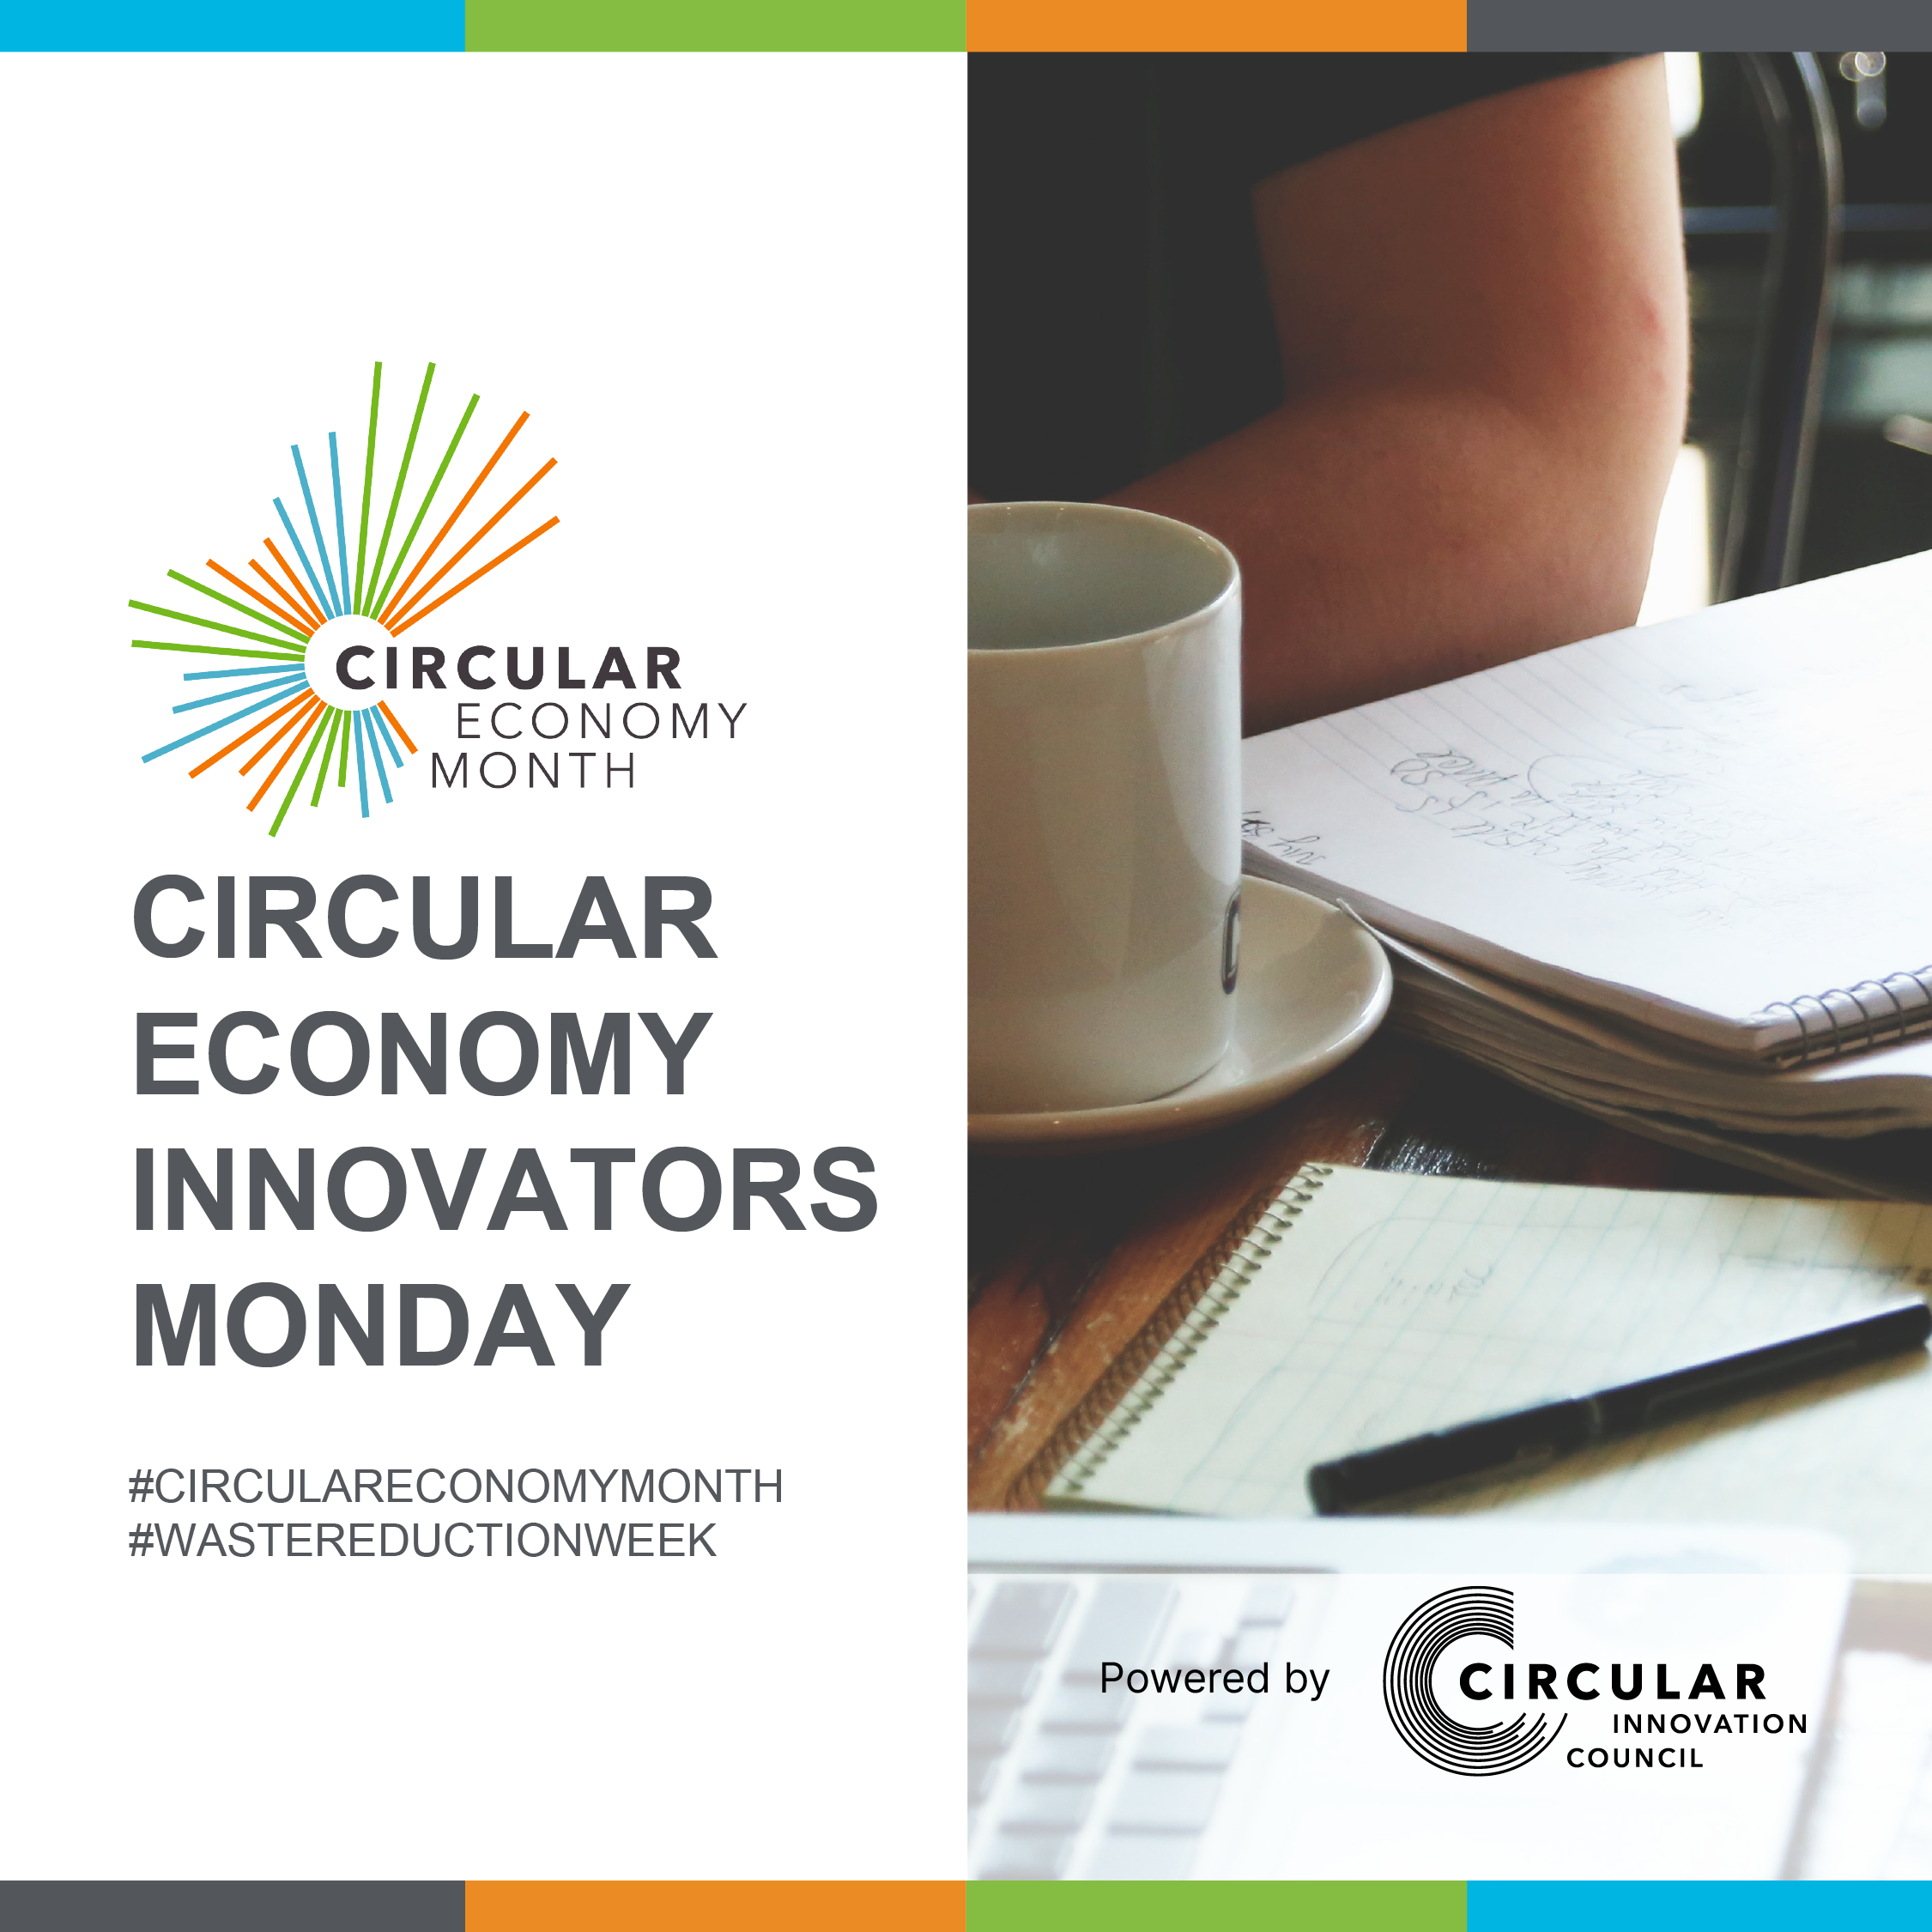 Person with paper, pen and coffee cup. Circular Economy innovators Monday. #CircularEconomyMonth #WasteReductionWeek. Circular Economy Month, powered by Circular Innovation Council.